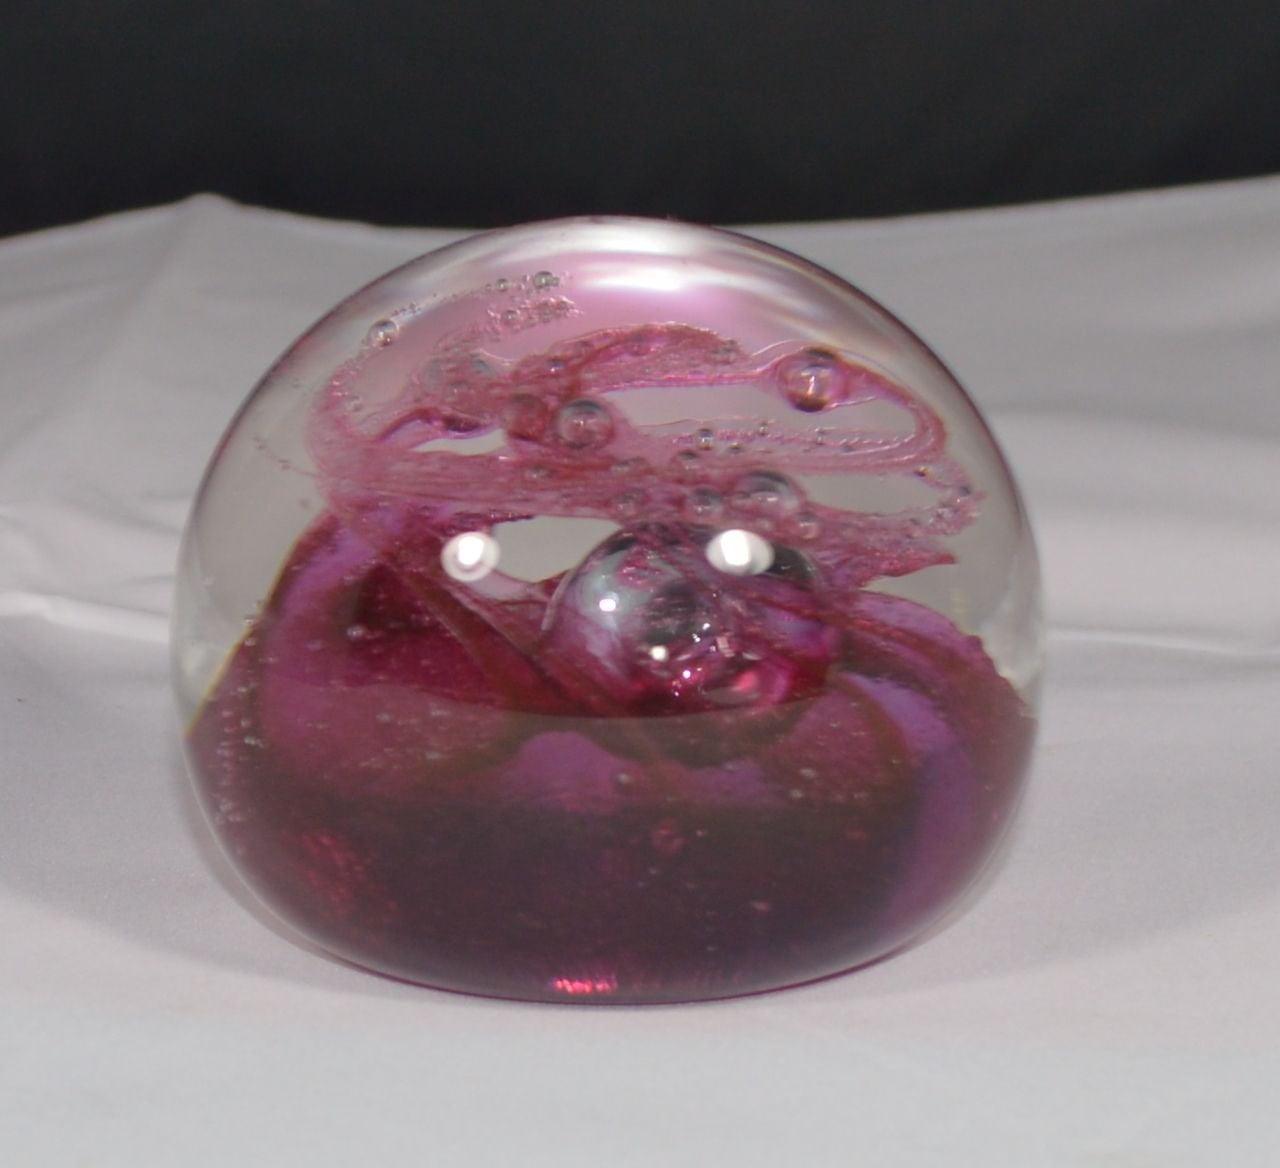 CAITHNESS PAPER WEIGHT RED WITH BUBBLES(PREVIOUSLY OWNED) GOOD CONDITION - TMD167207